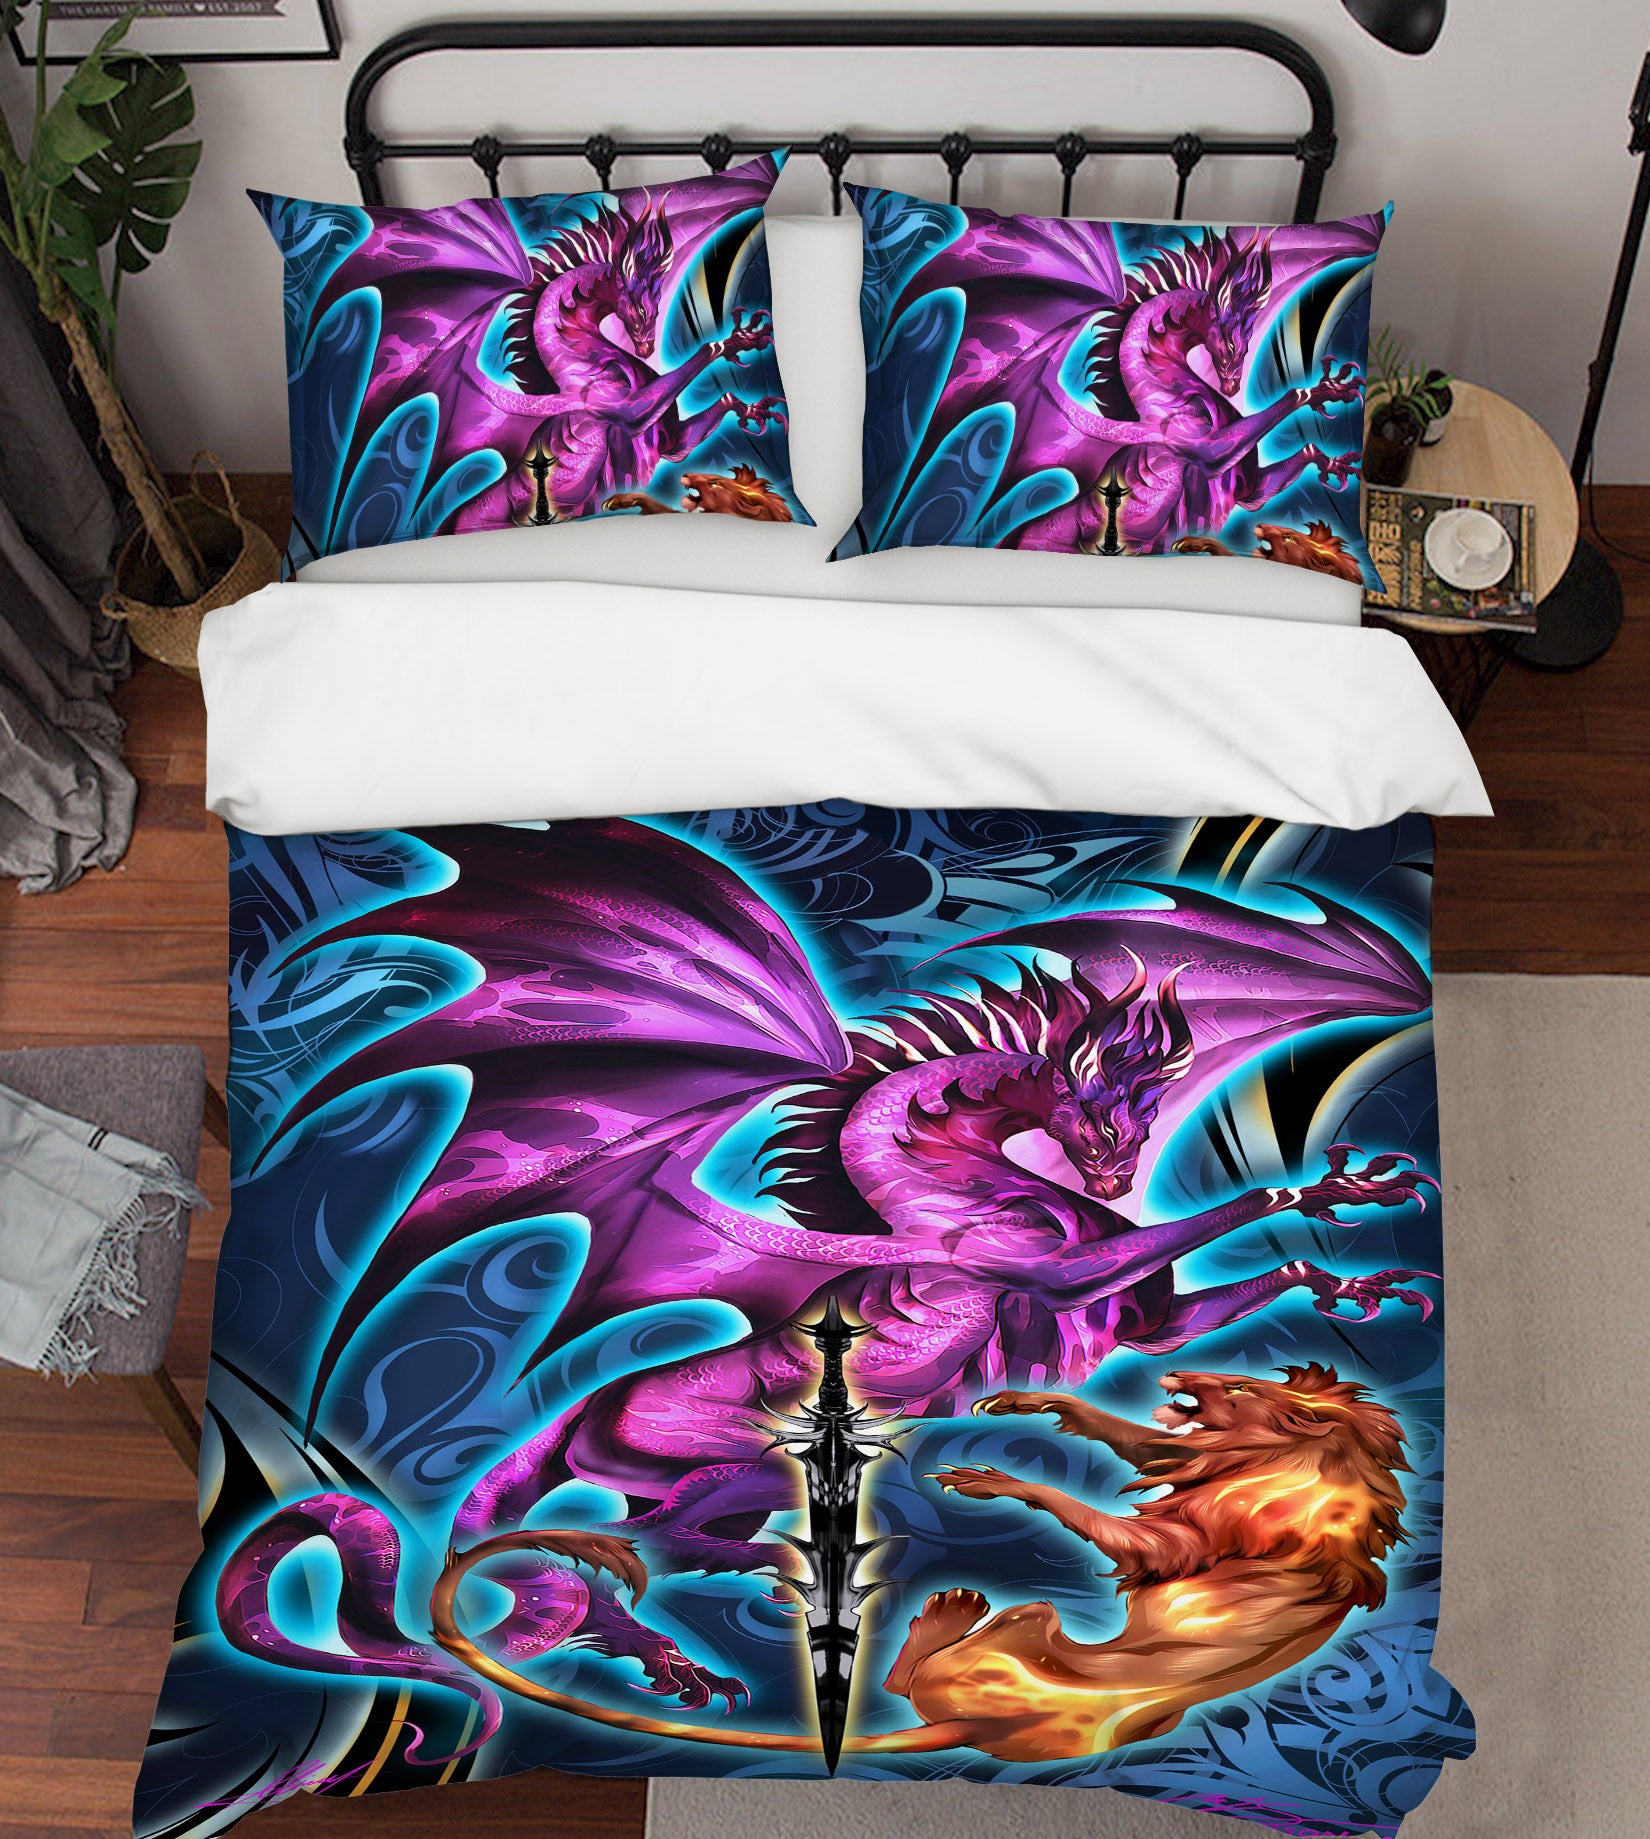 3D Dragon Lion 8315 Ruth Thompson Bedding Bed Pillowcases Quilt Cover Duvet Cover